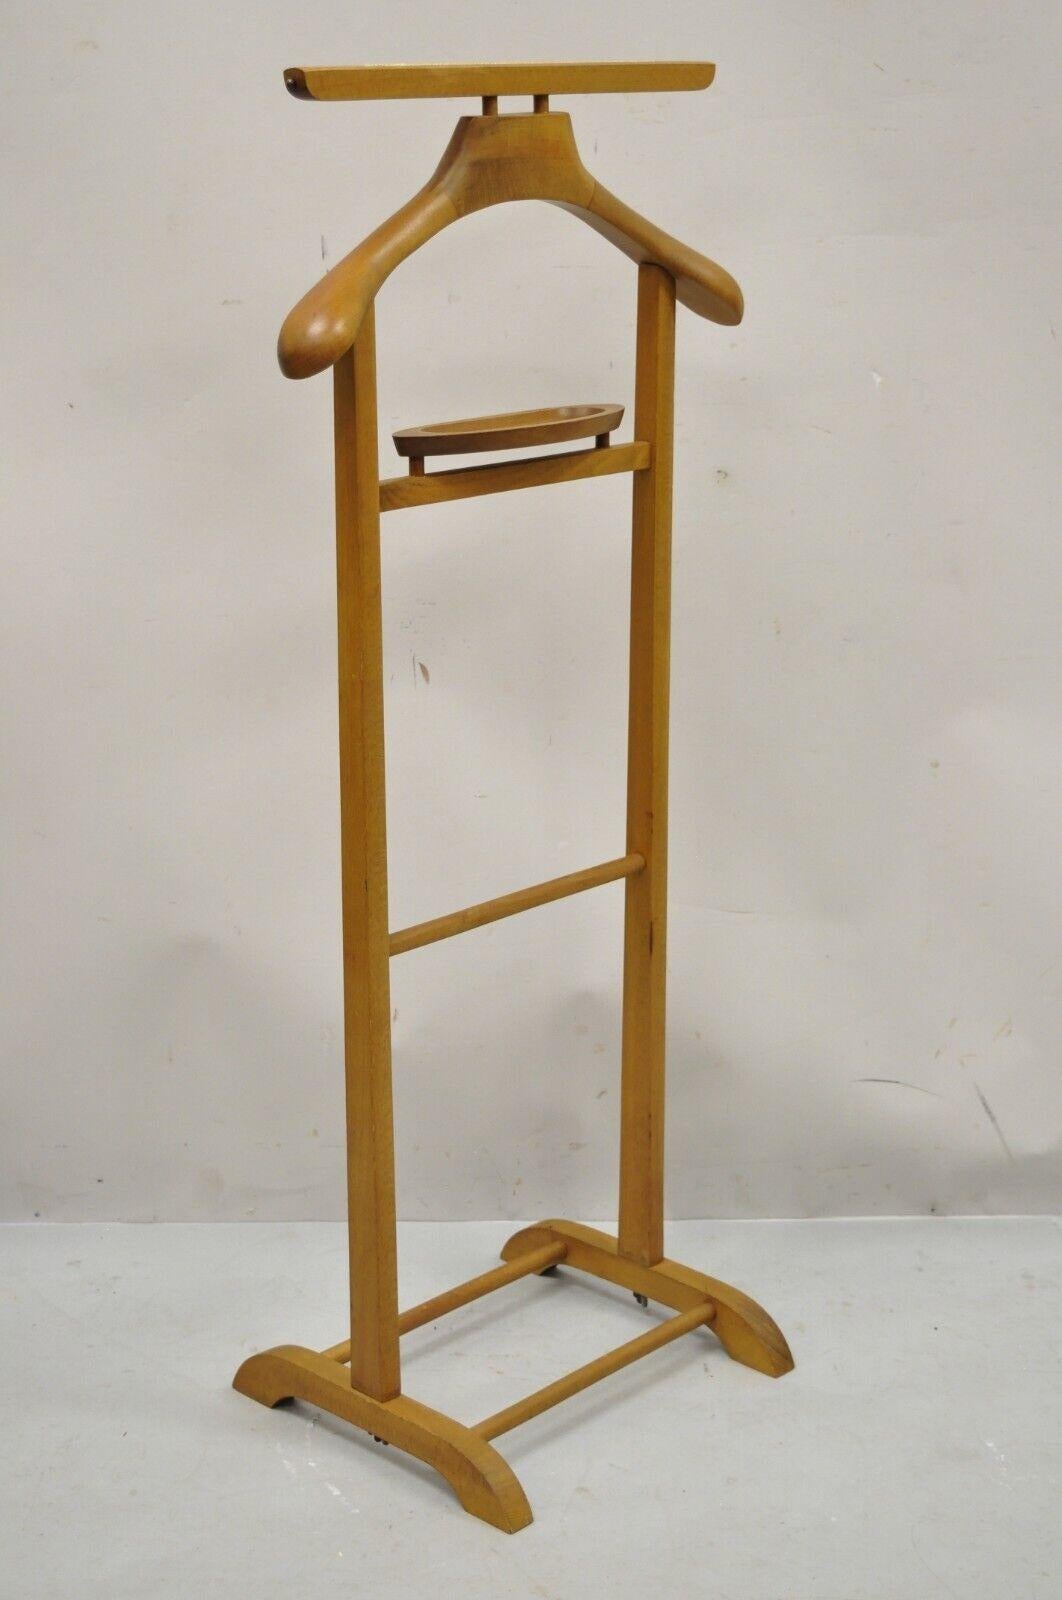 Italian Mid Century Modern Birch Wood Clothing Valet Butler Stand By SPQR. Item features solid wood construction, beautiful wood grain, original stamps, very nice vintage item, great style and form. Circa Mid 20th Century. Measurements: 42.5